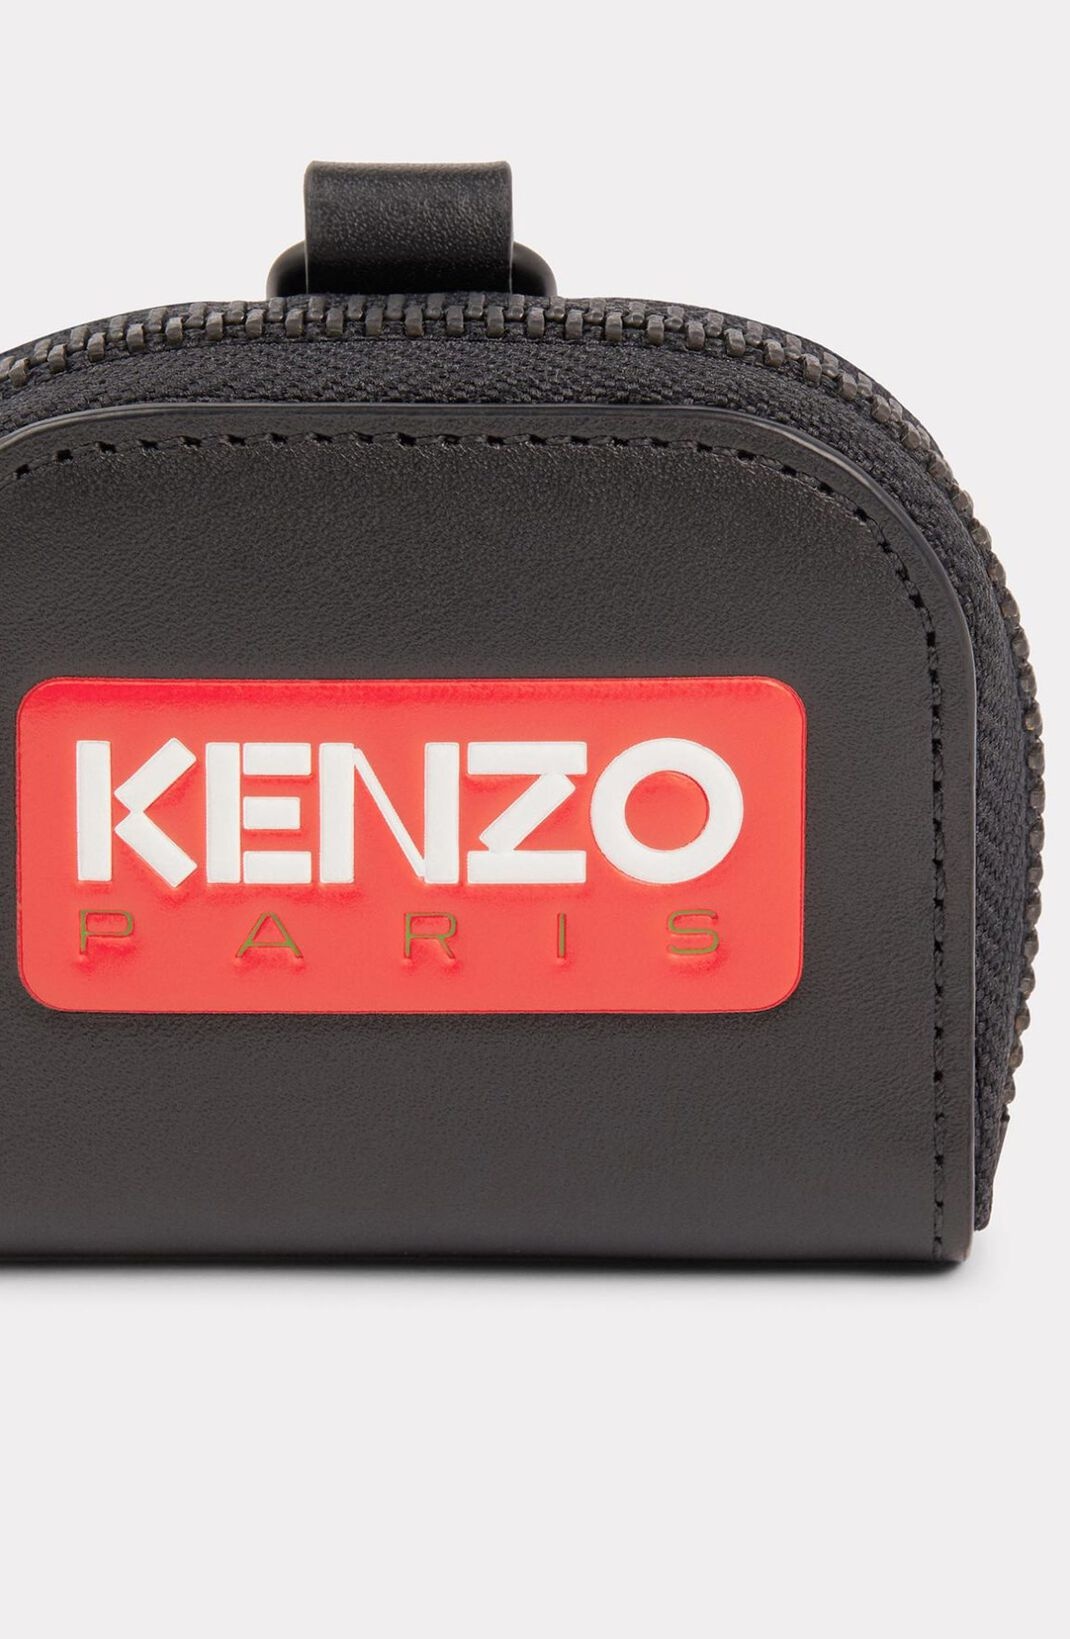 KENZO Paris leather AirPods case - 3